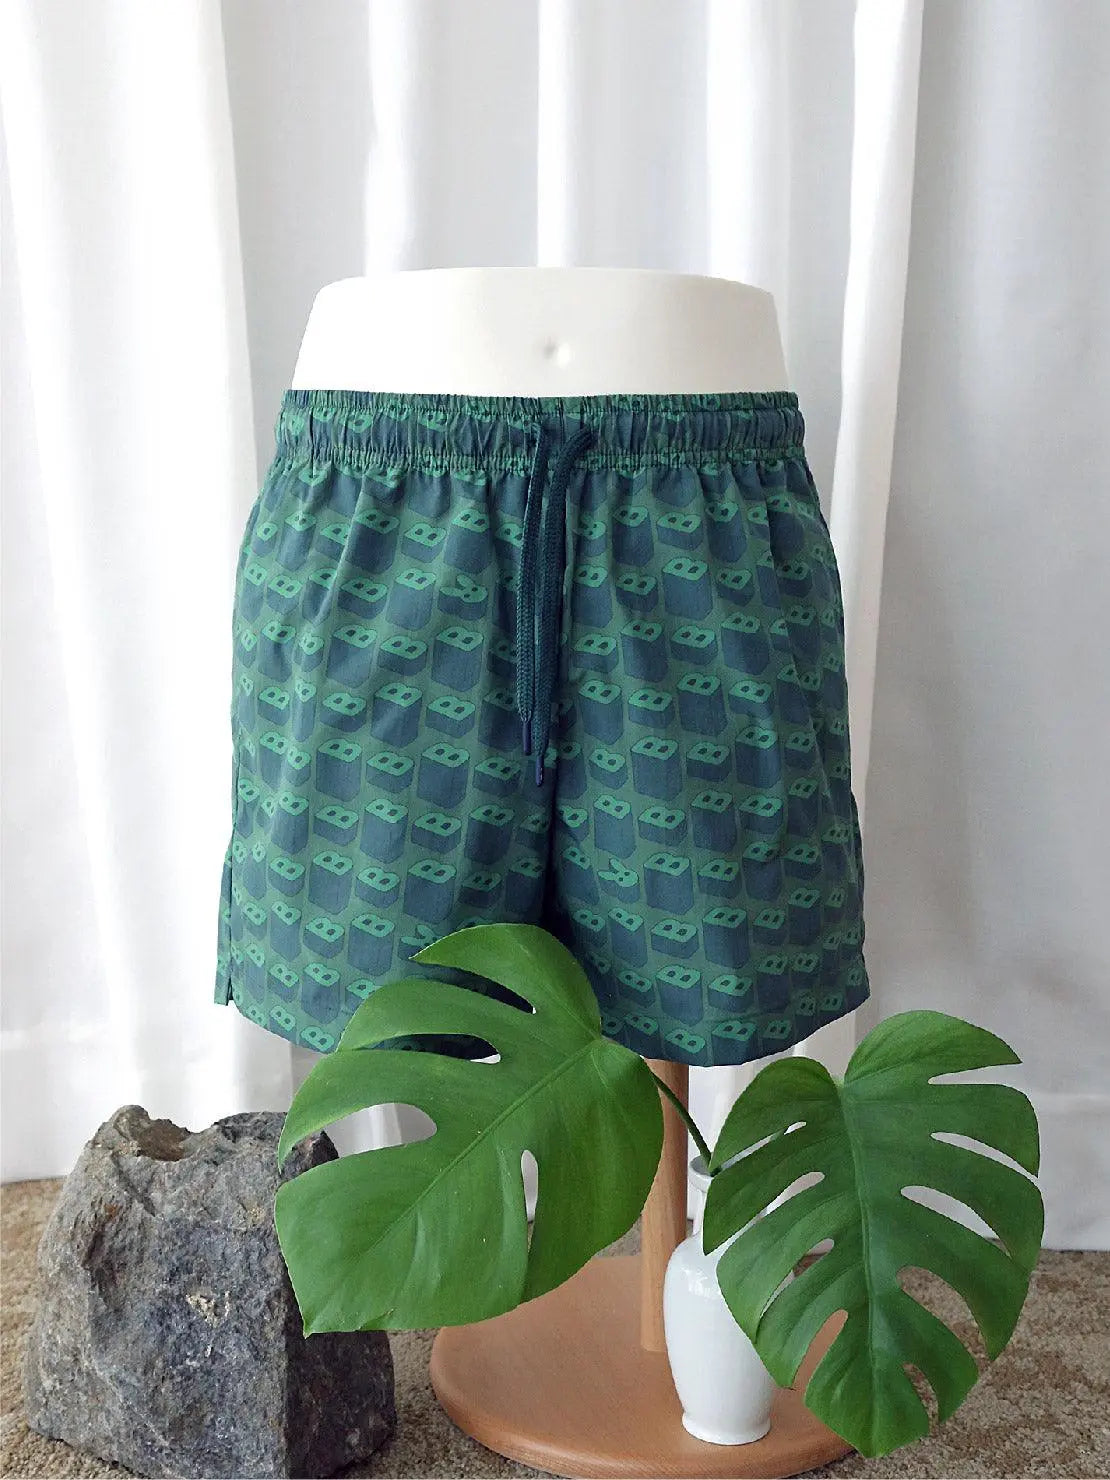 A pair of B's Green Swimwear with a pattern of small green 3D glasses displayed on a mannequin against a white curtain backdrop. The swimwear has an elastic waistband with a drawstring. In the foreground, there is a large green monstera leaf and a small rock on a circular wooden stand from Bassal in Barcelona.